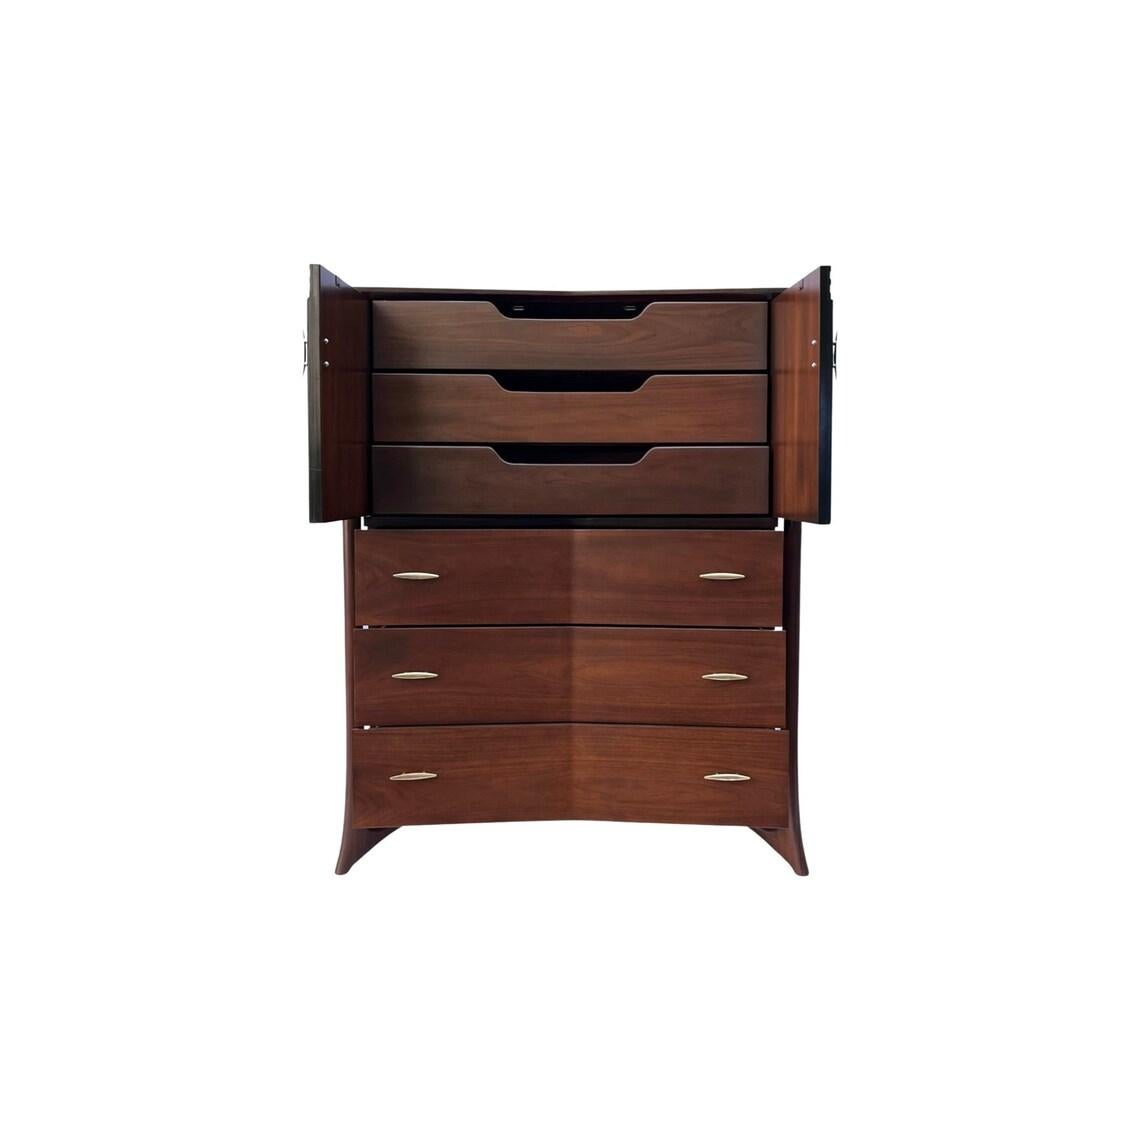 Introducing an exquisite example of mid-century modern design, behold this stunning walnut and brass highboy dresser by the renowned designer Piet Hein. Meticulously crafted, this sculptural masterpiece features hand-formed solid walnut legs,